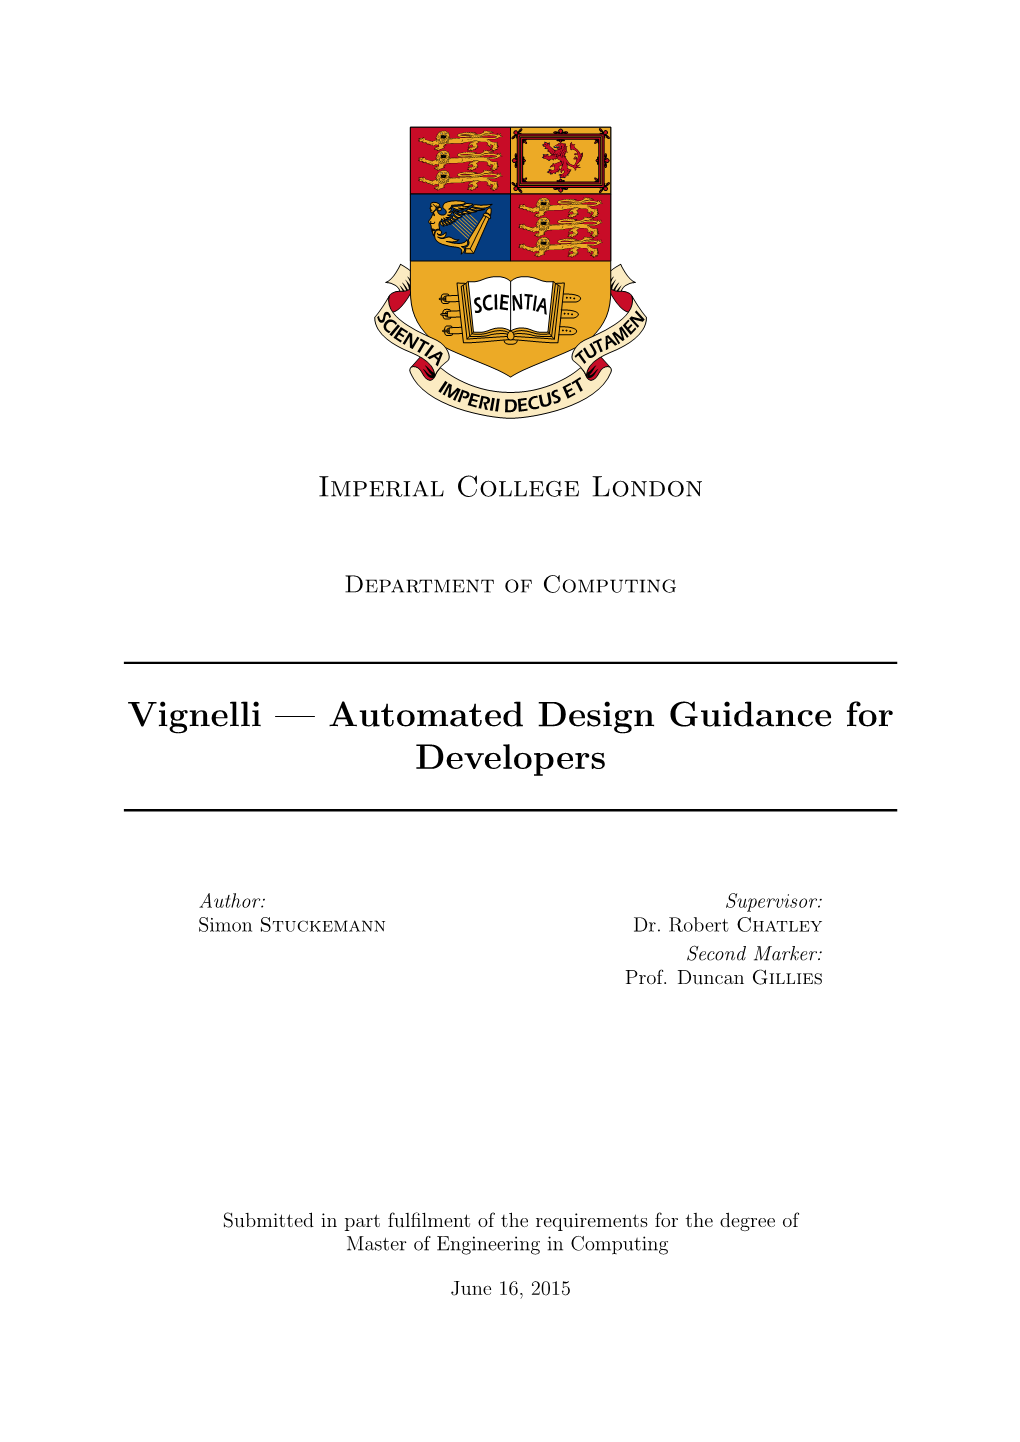 Vignelli — Automated Design Guidance for Developers